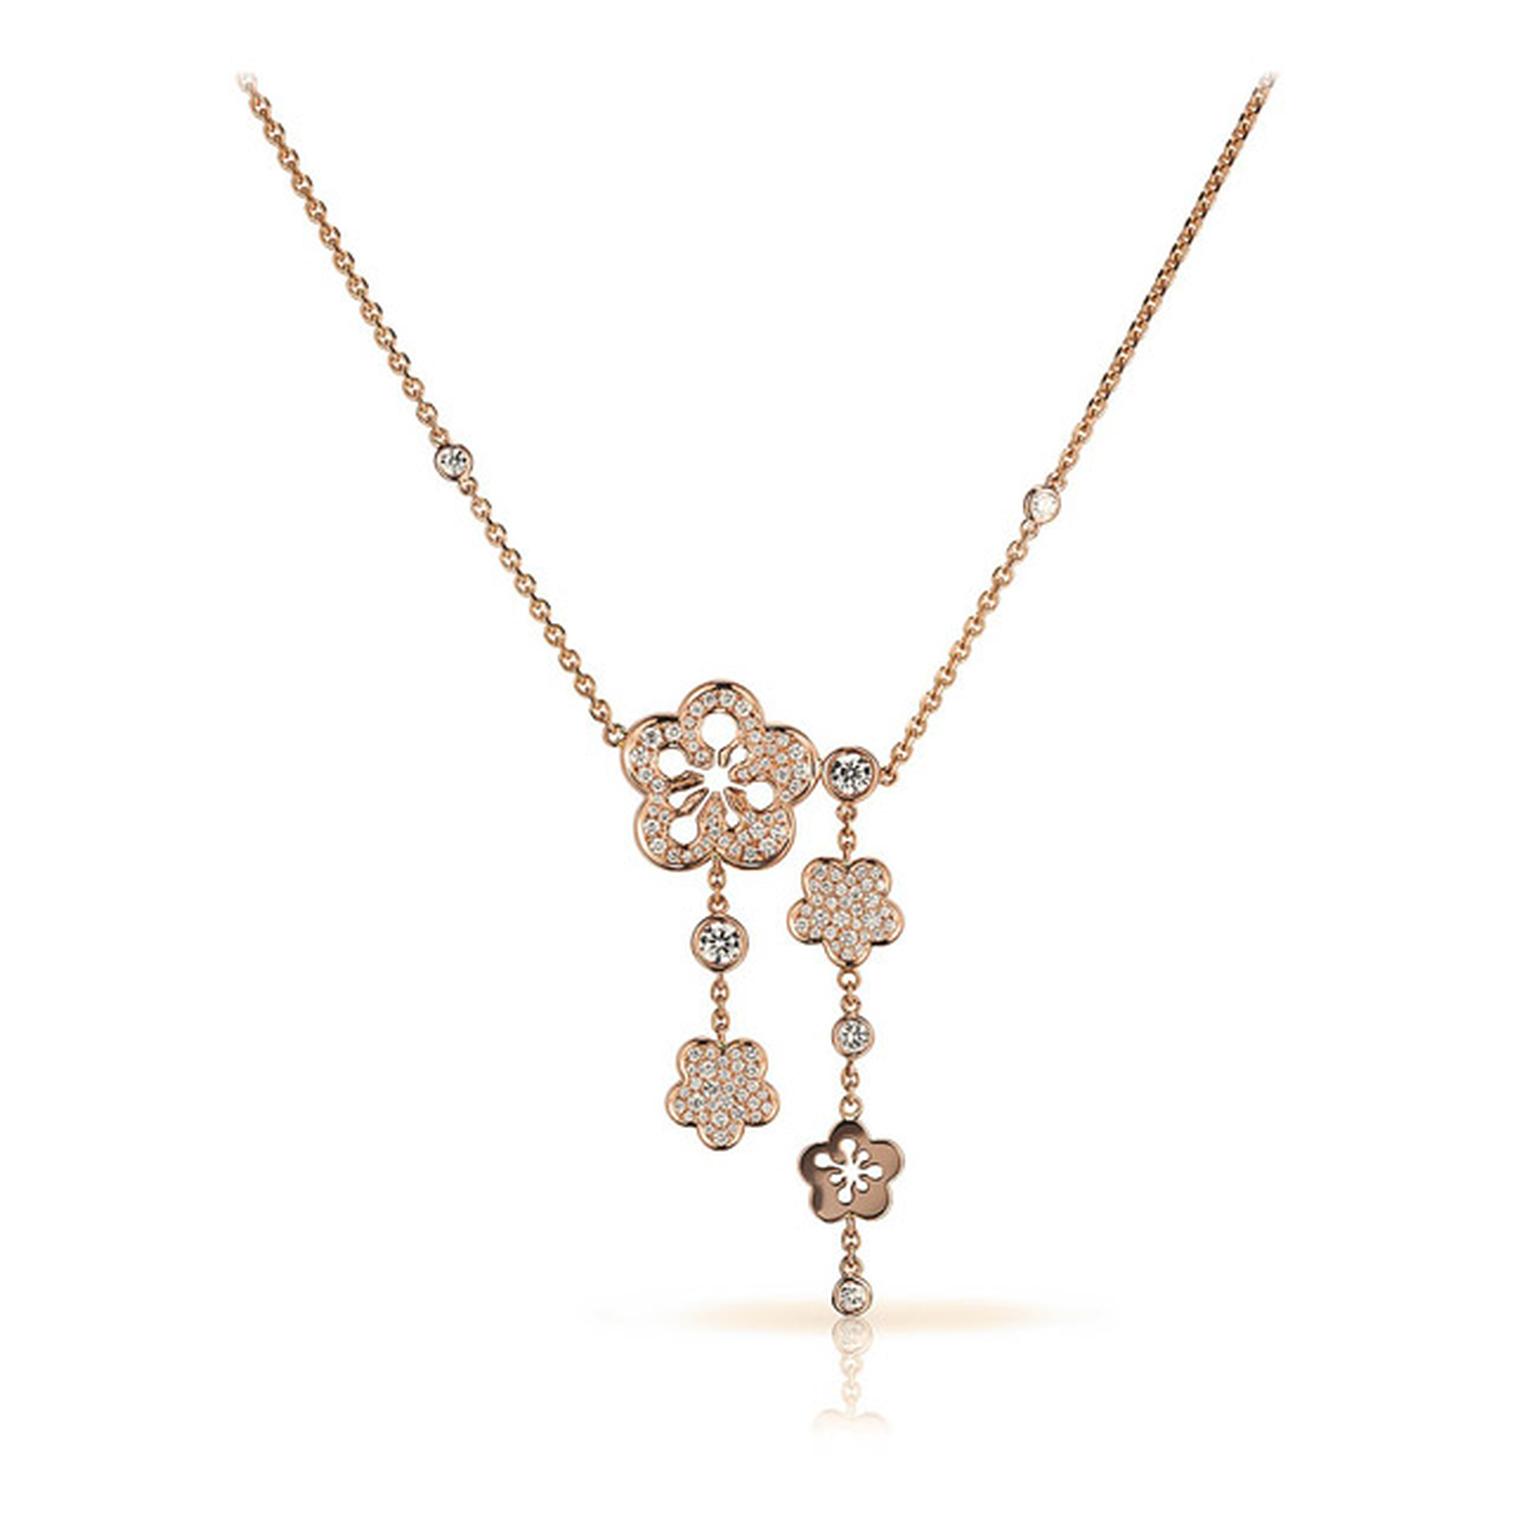 Boodles-Blossom-Necklace-Main